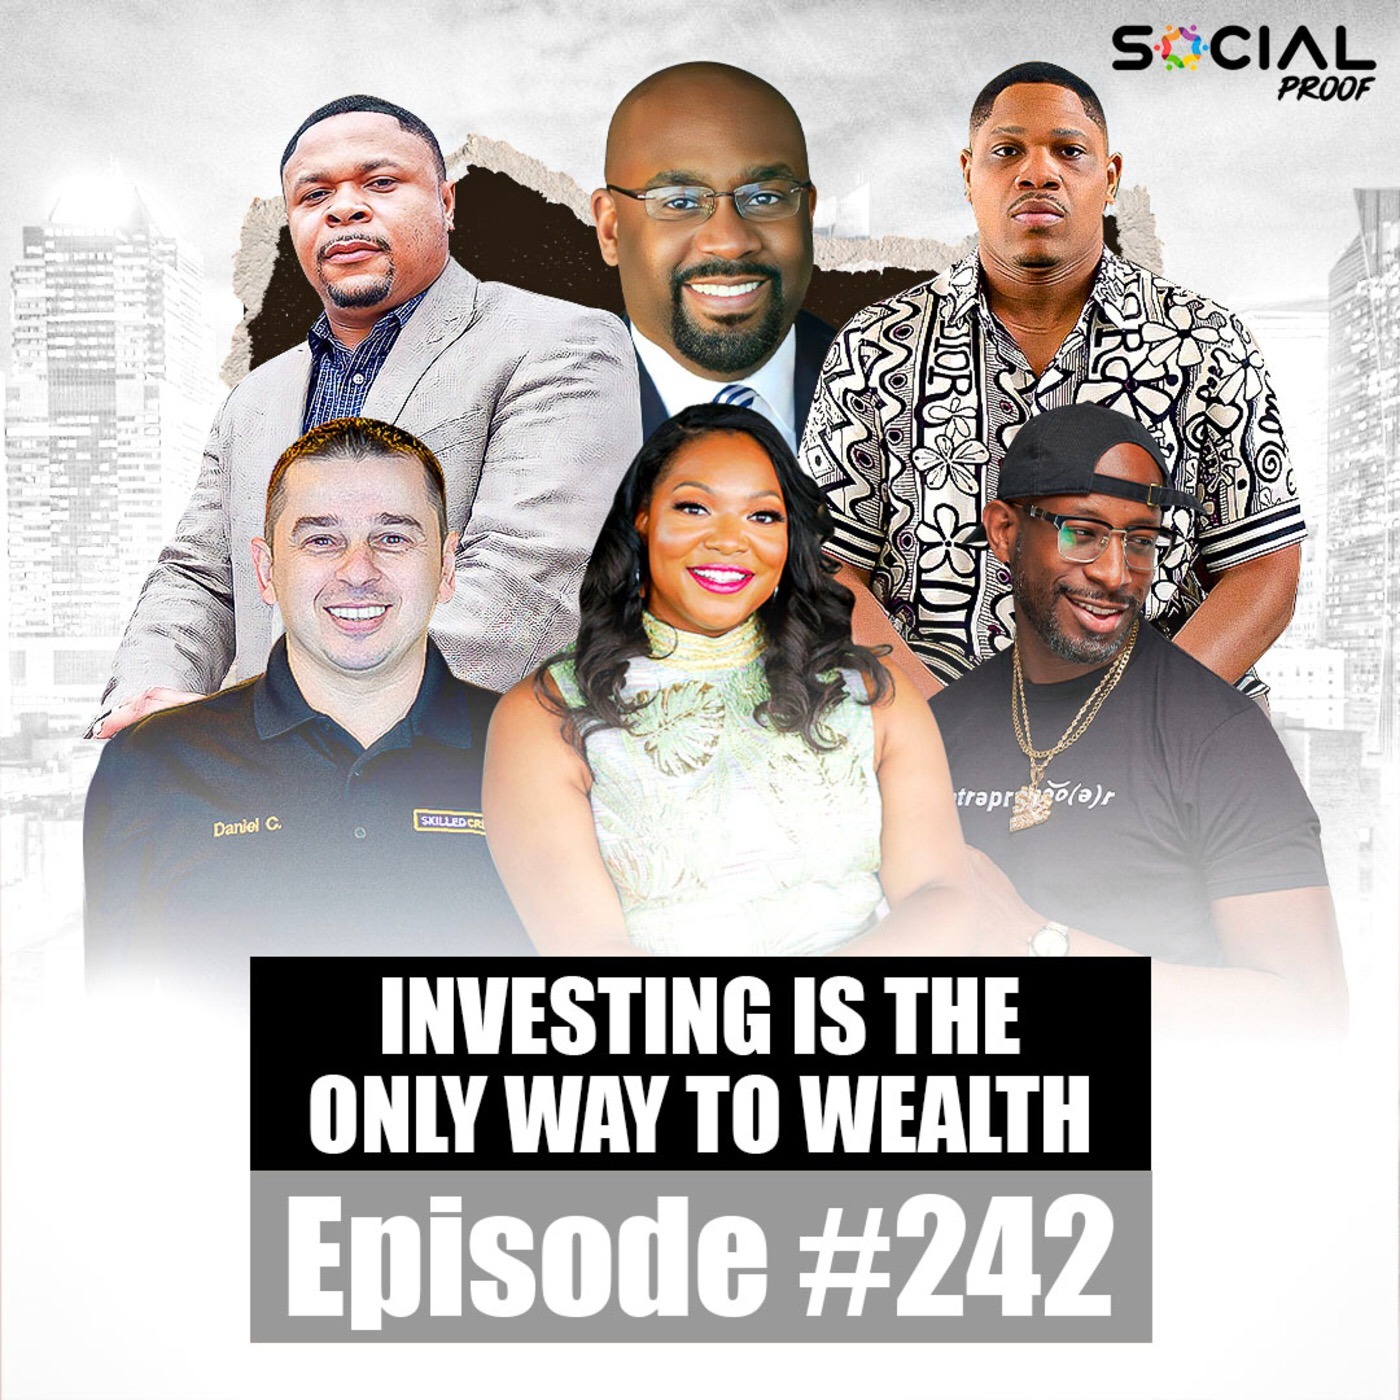 Investing Is The Only Way To Wealth - Episode #242 w/ Social Proof 7